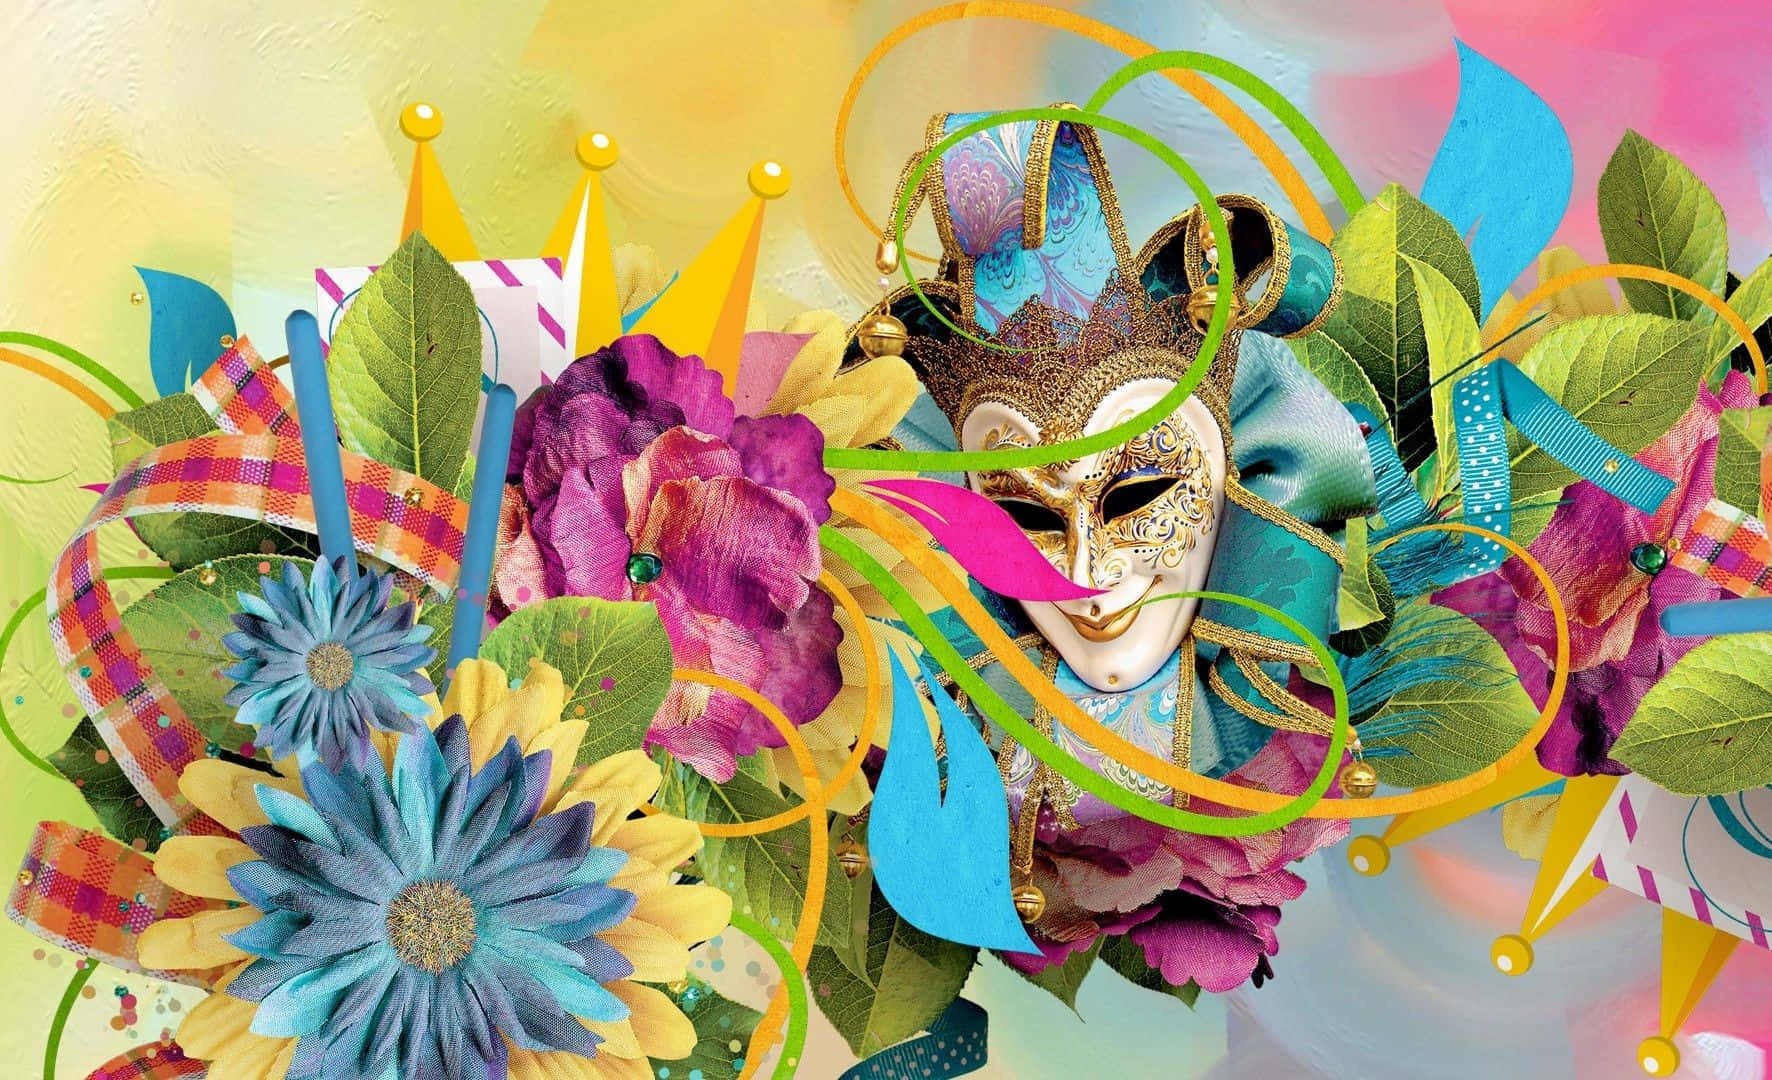 A Colorful Mask With Flowers And Leaves